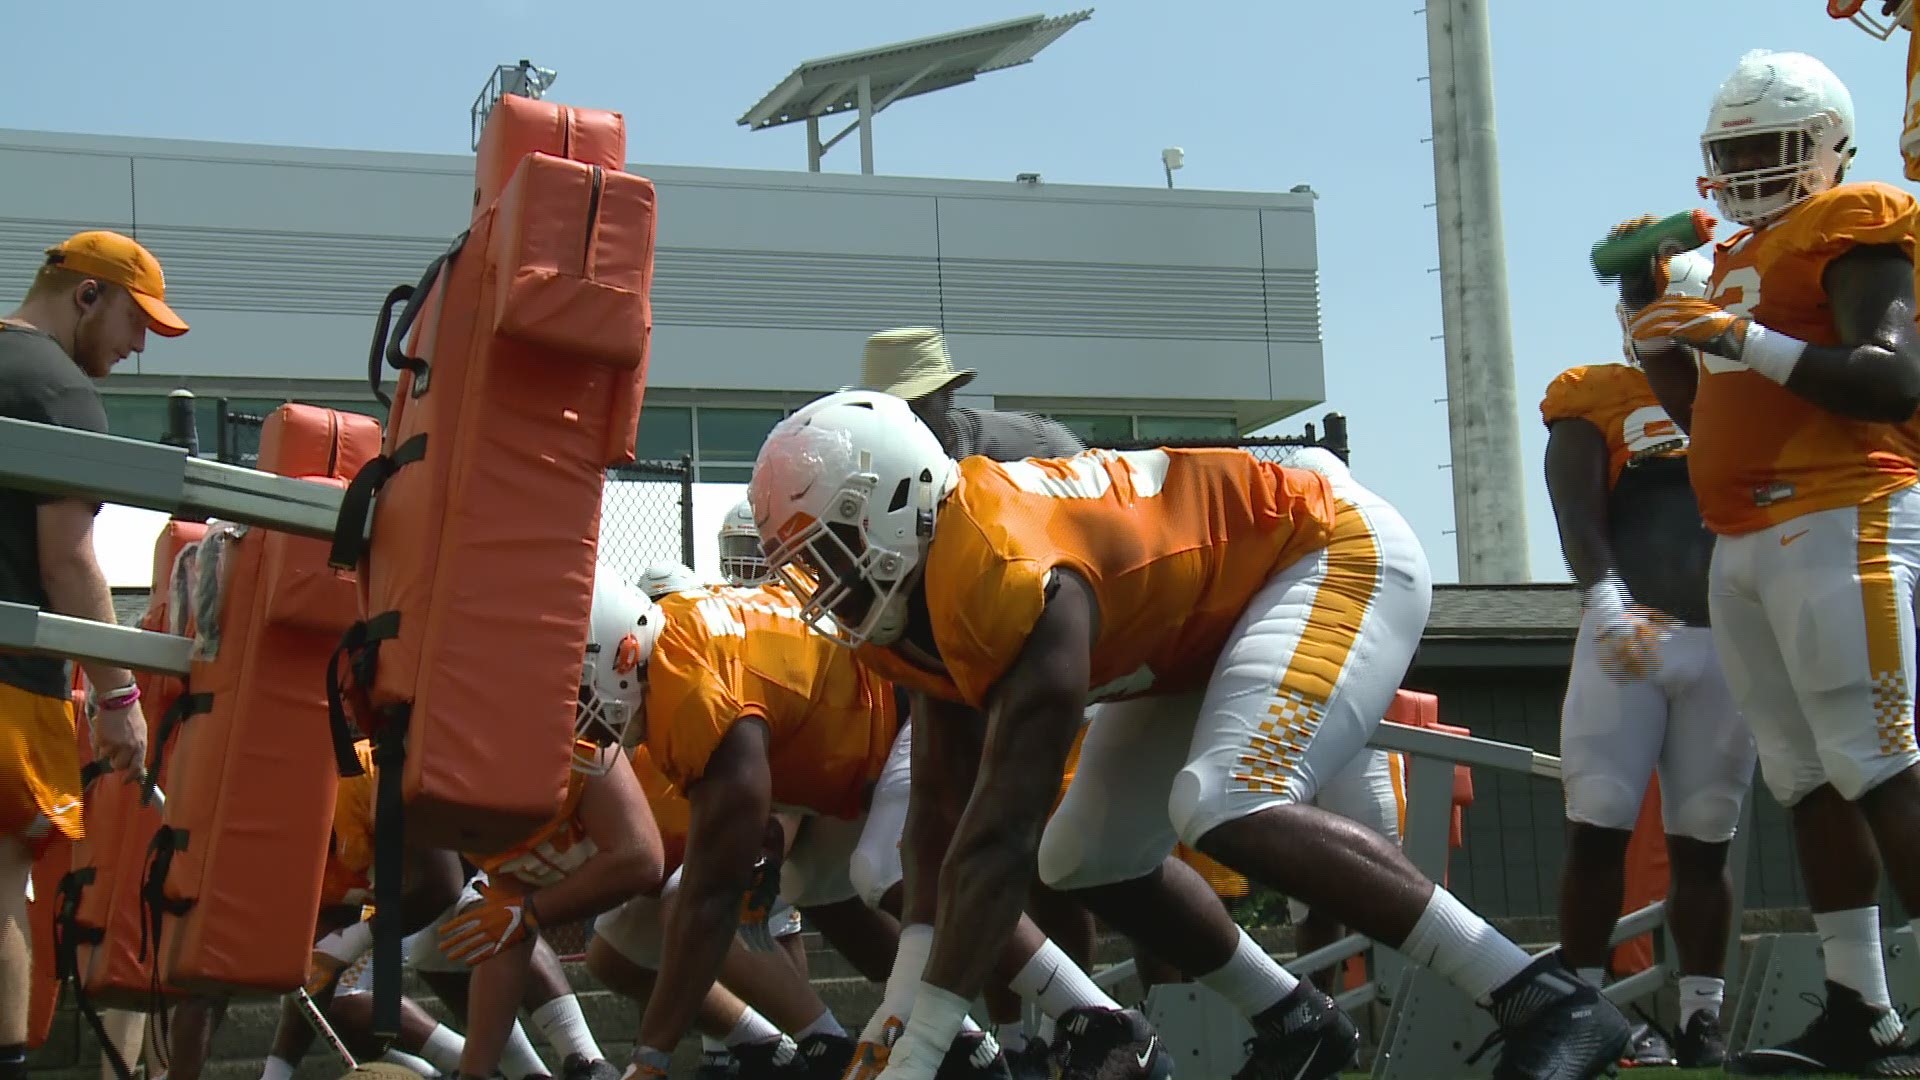 The Vols practiced out on Haslam Field on Tuesday afternoon with less than two weeks to go until the first game on September 1.